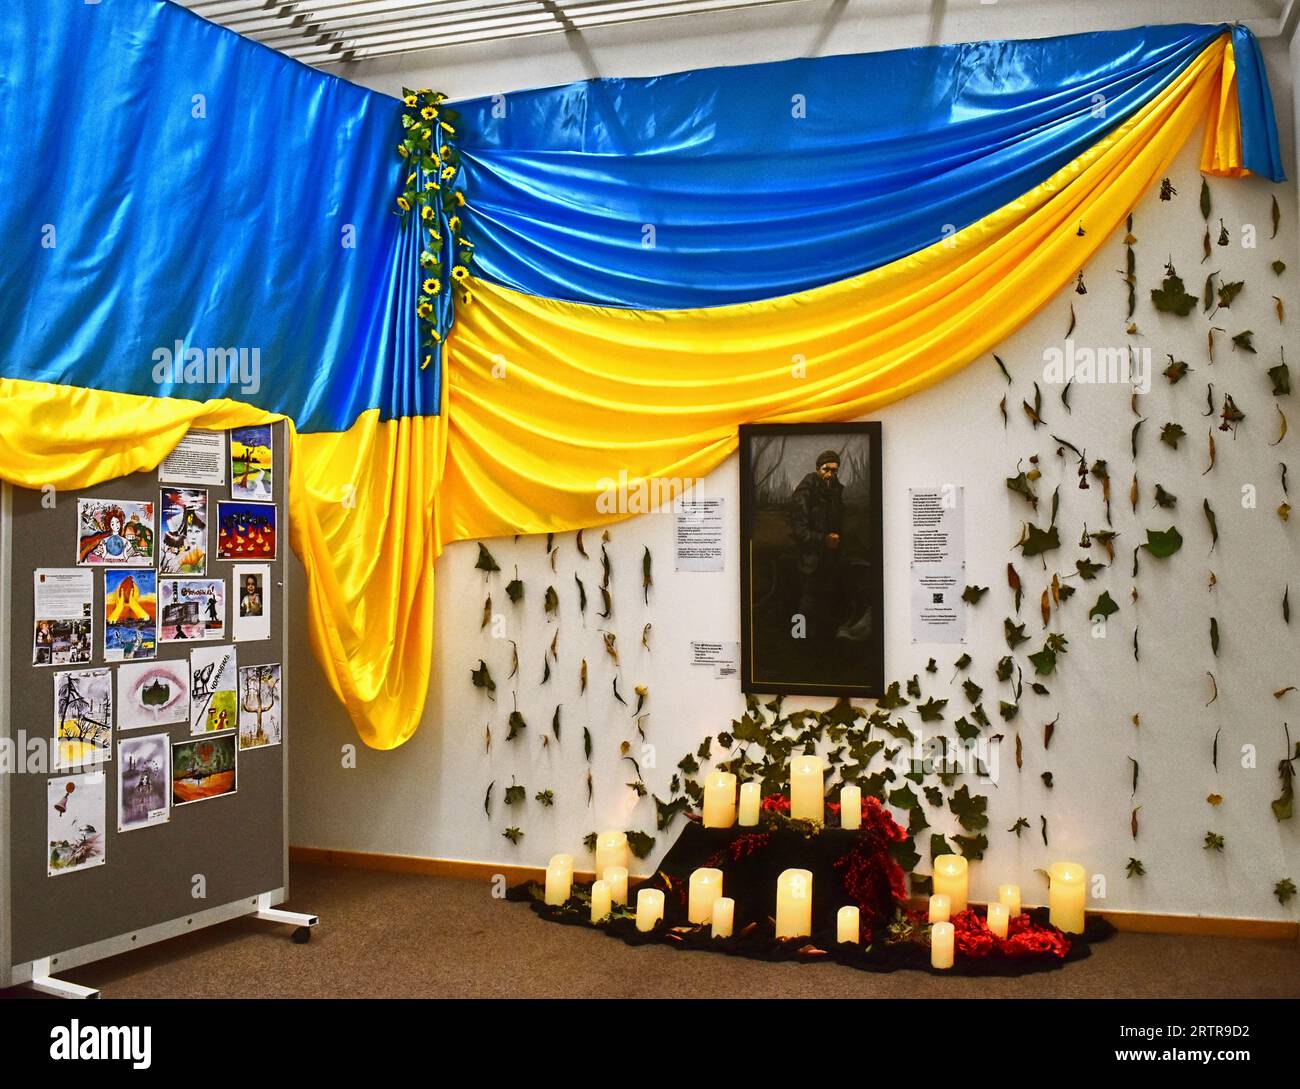 A memorial to Oleksandr Matsievskyi. This is from the exhibition “Love Freedom Ukraine” at Central Milton Keynes Library in September 2023. Stock Photo